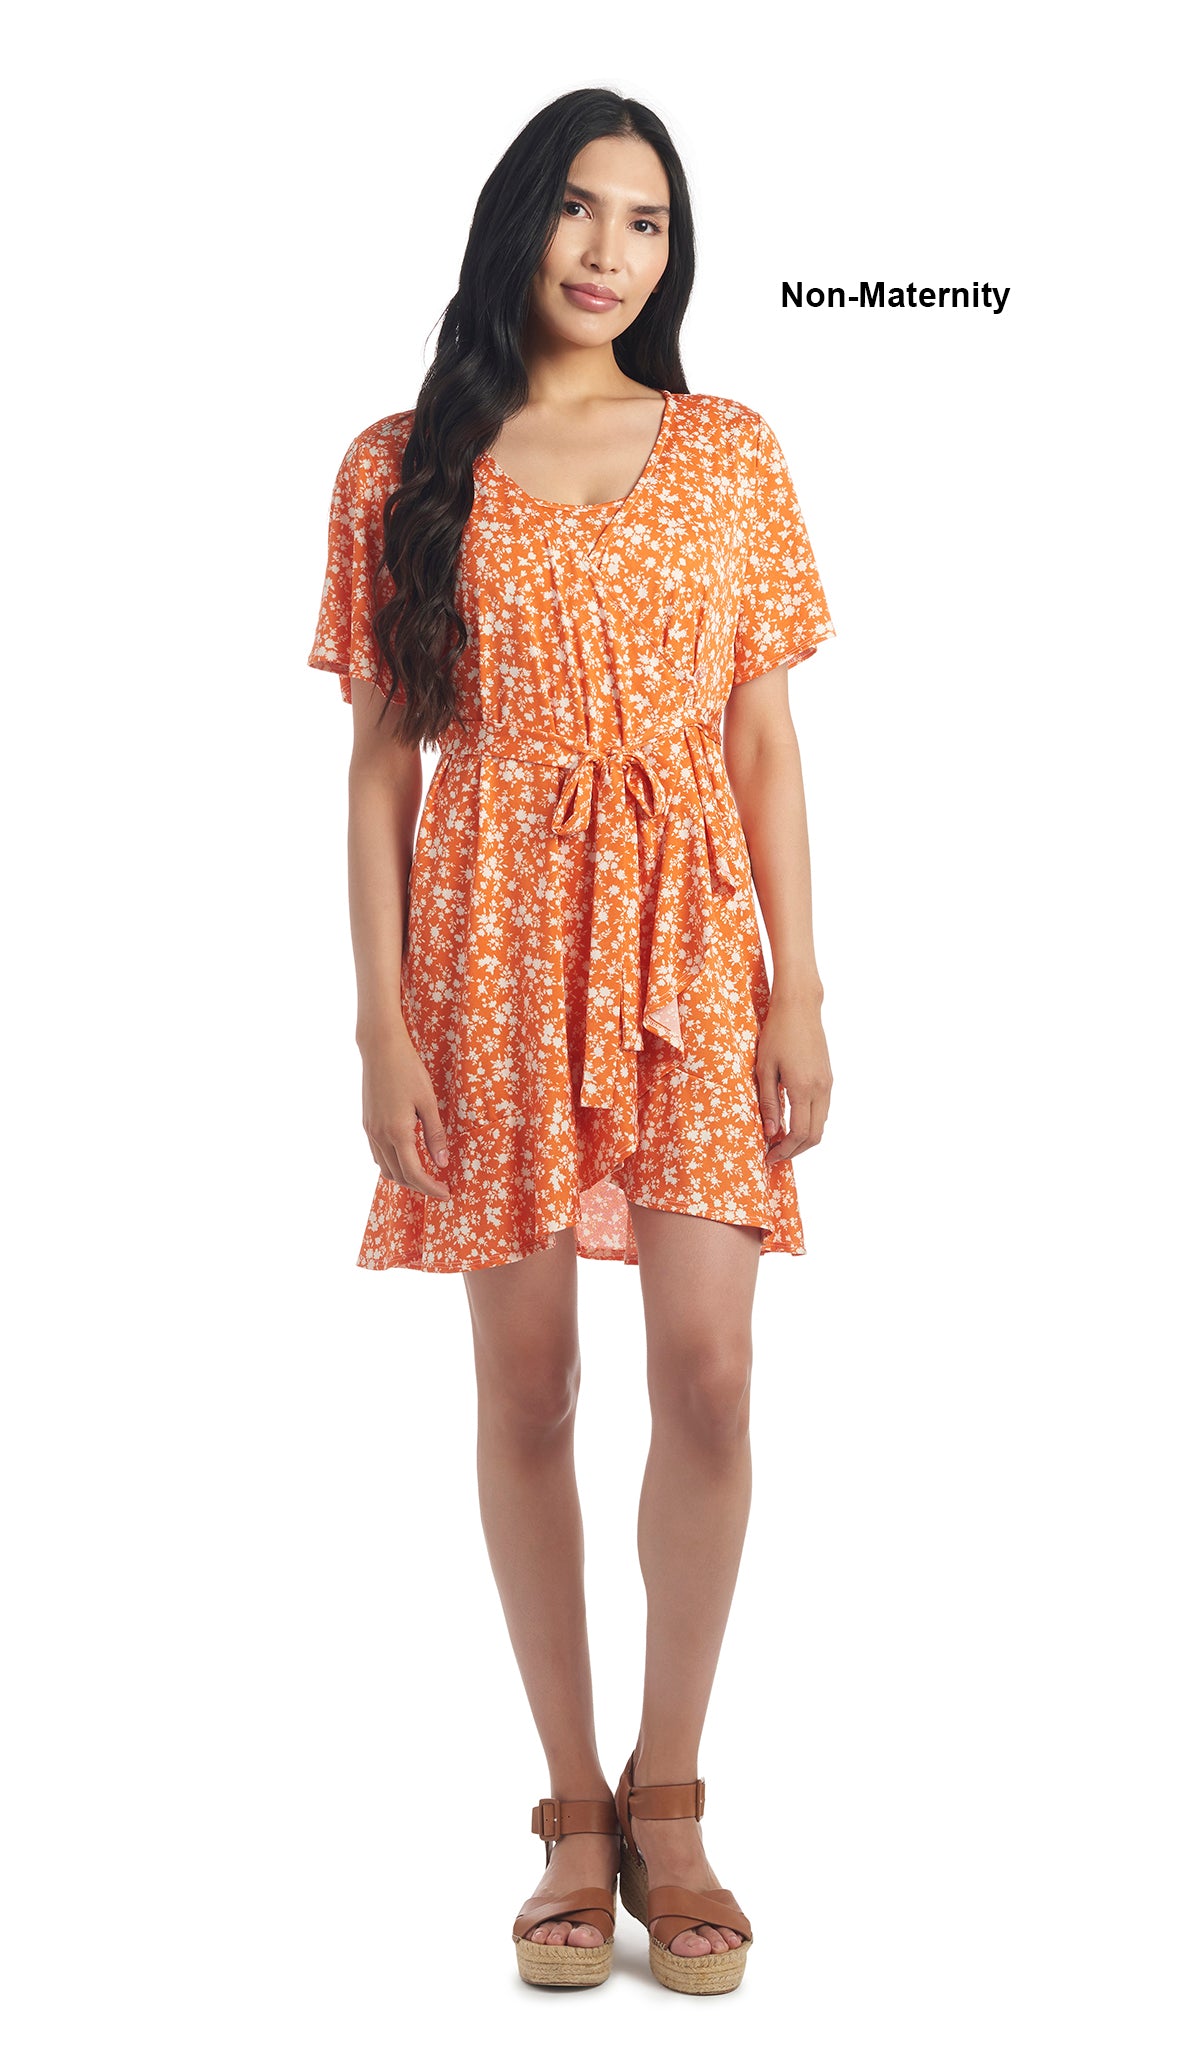 Citrus Floral Kristi Dress worn by woman as non-maternity style.